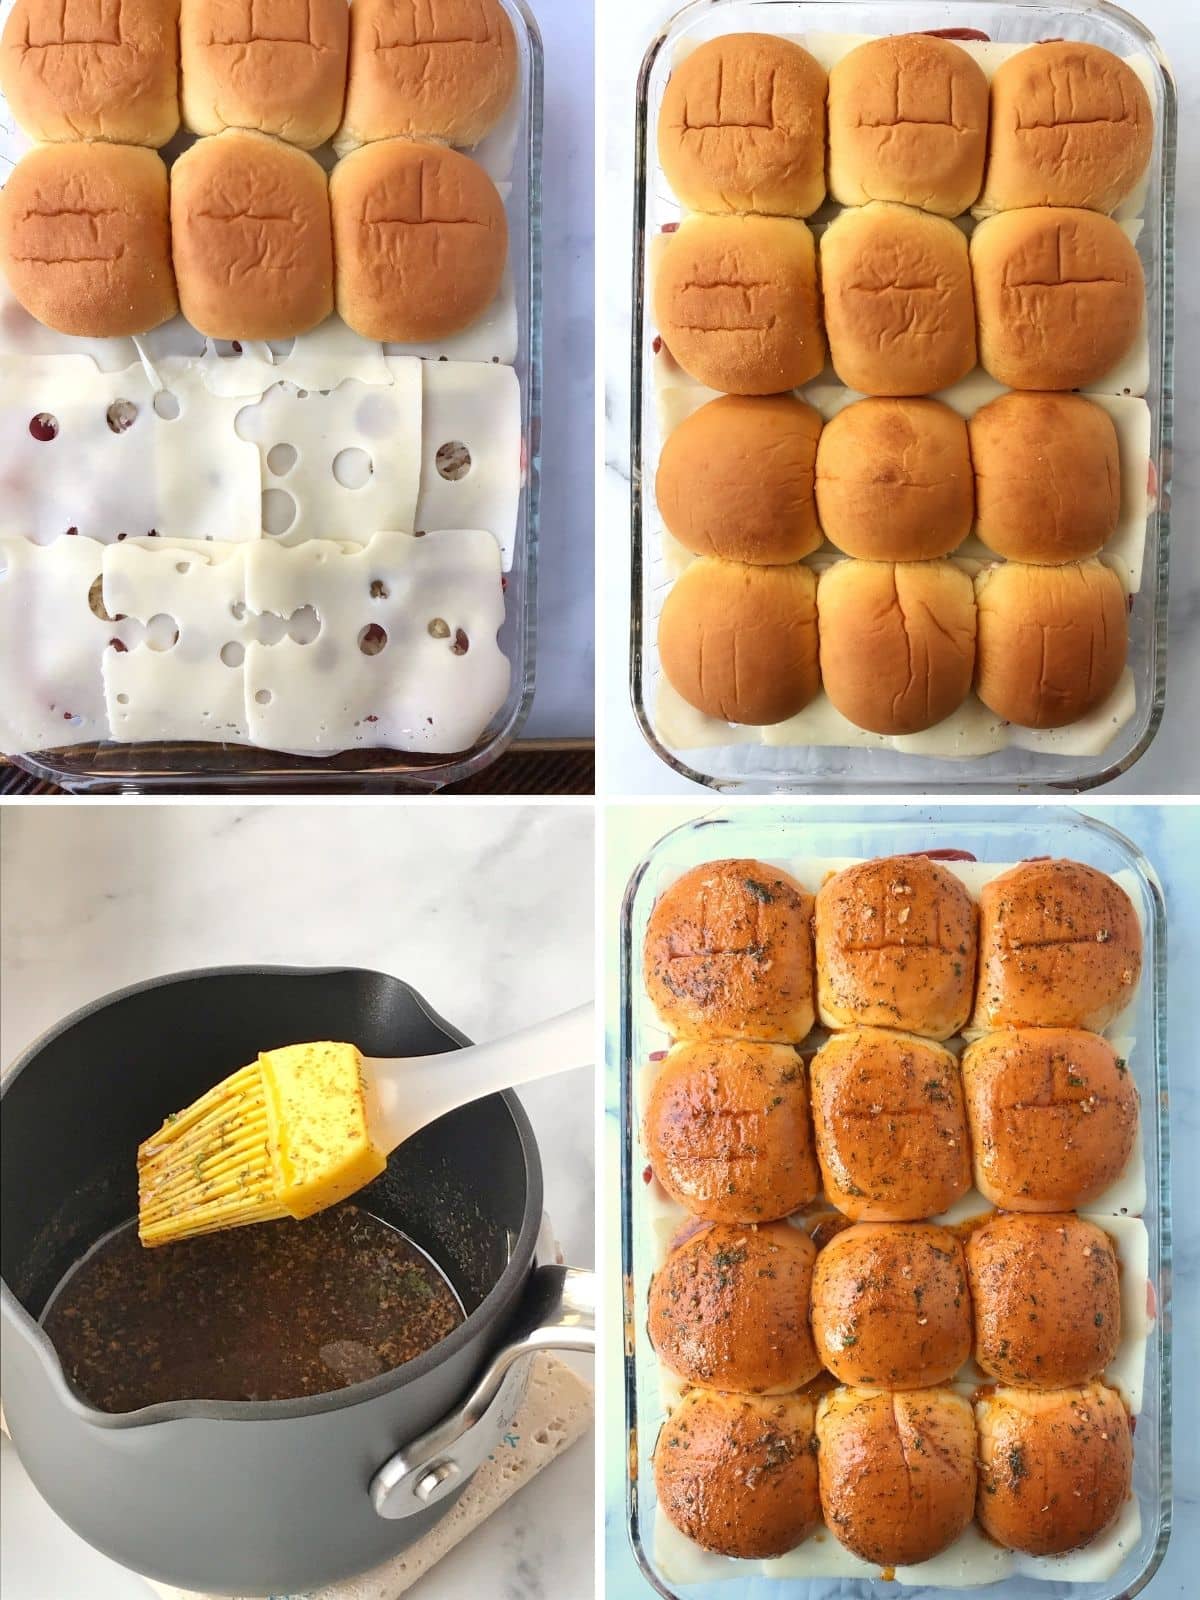 assembling sliders - top with cheese, then bun tops, then brush with melted butter